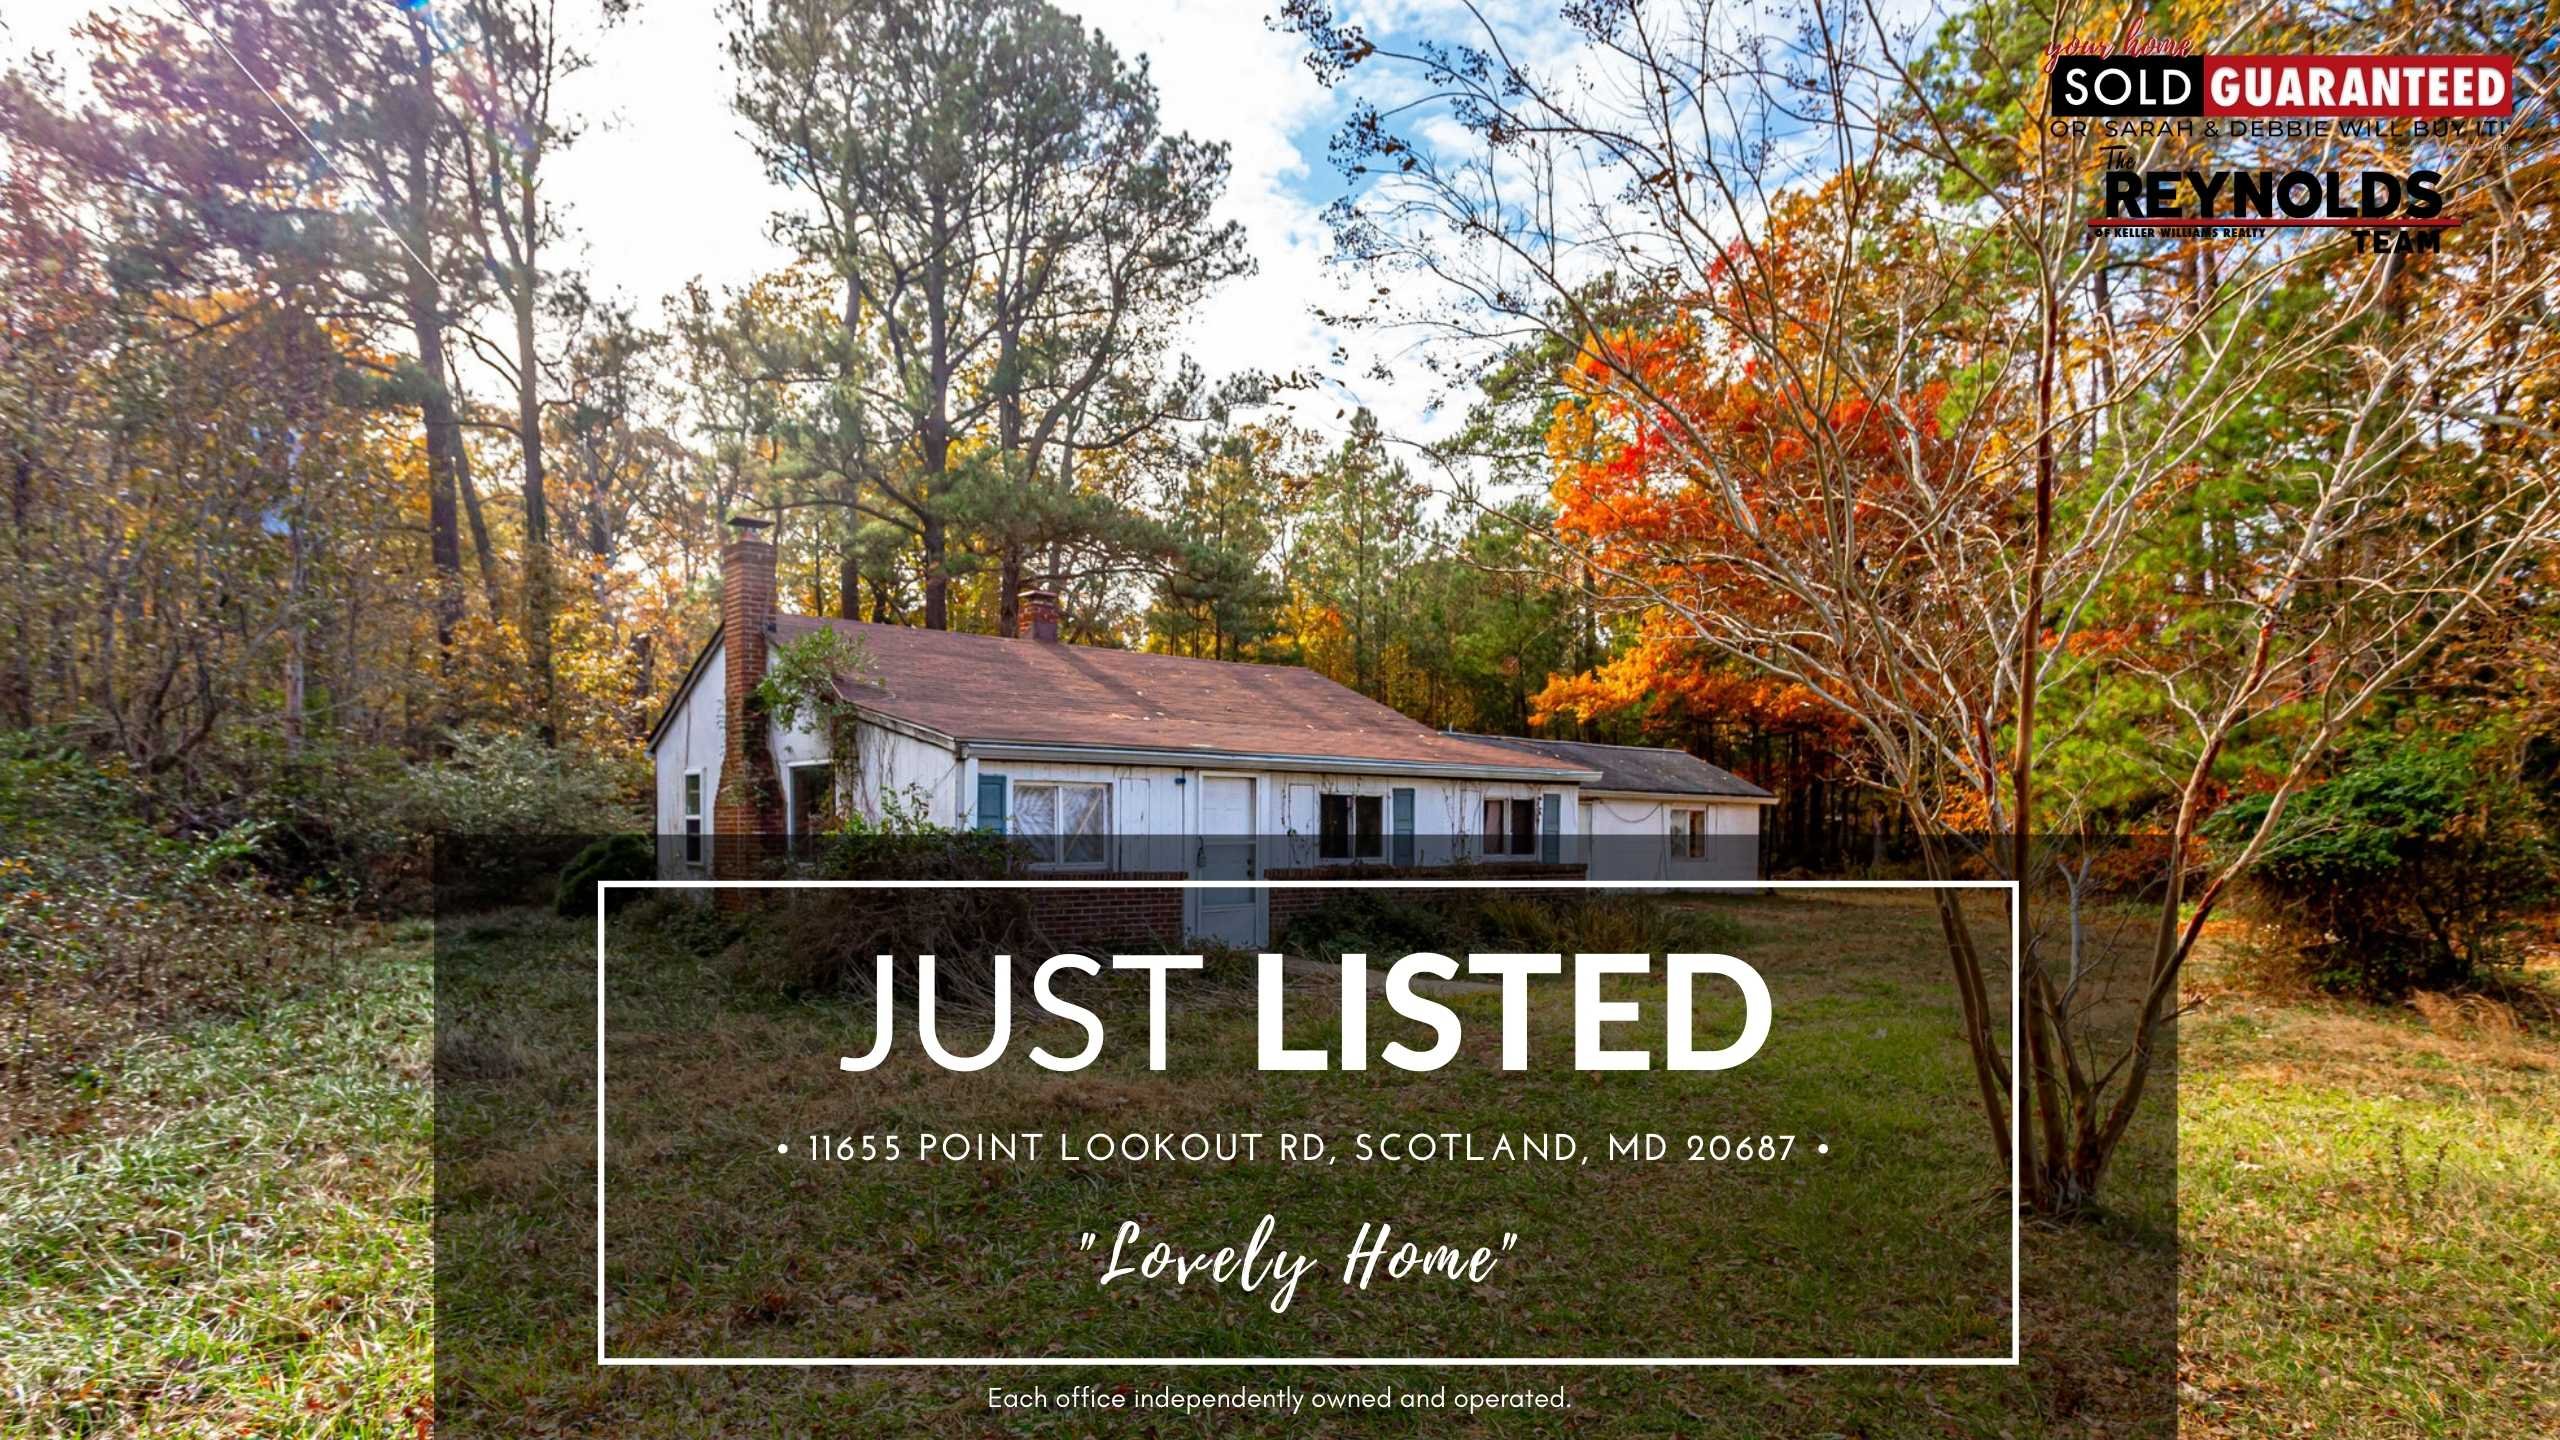 11655 Point Lookout Rd, Scotland, MD 20687